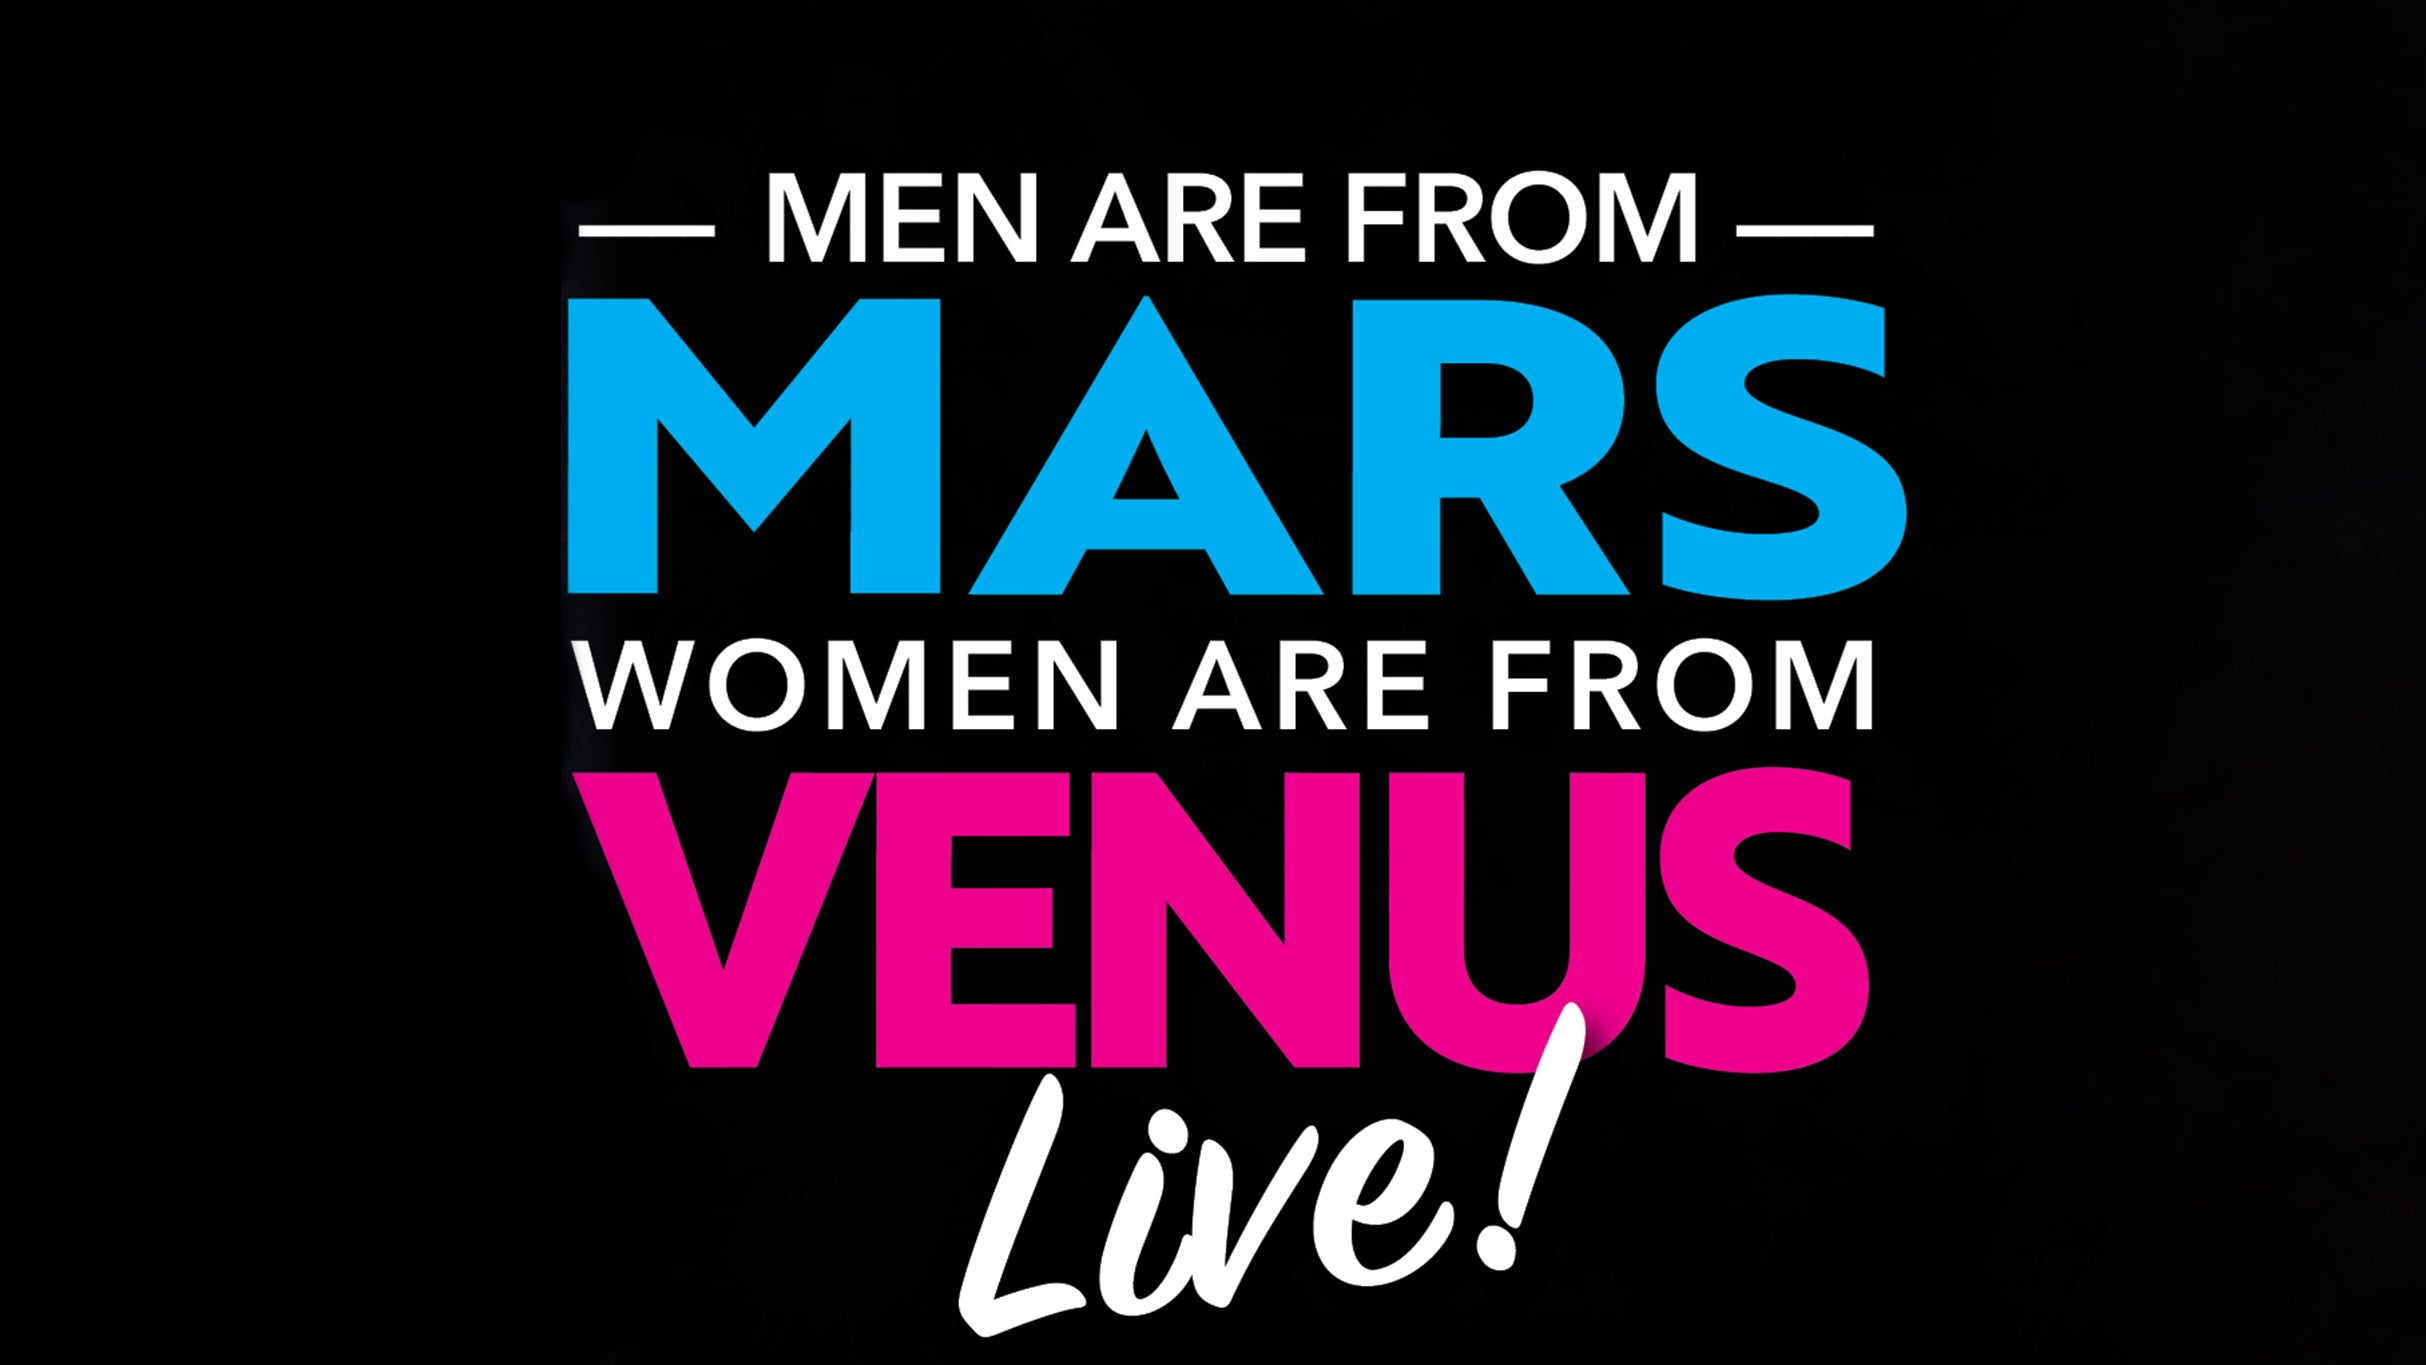 Men are From Mars Women are From Venus LIVE!